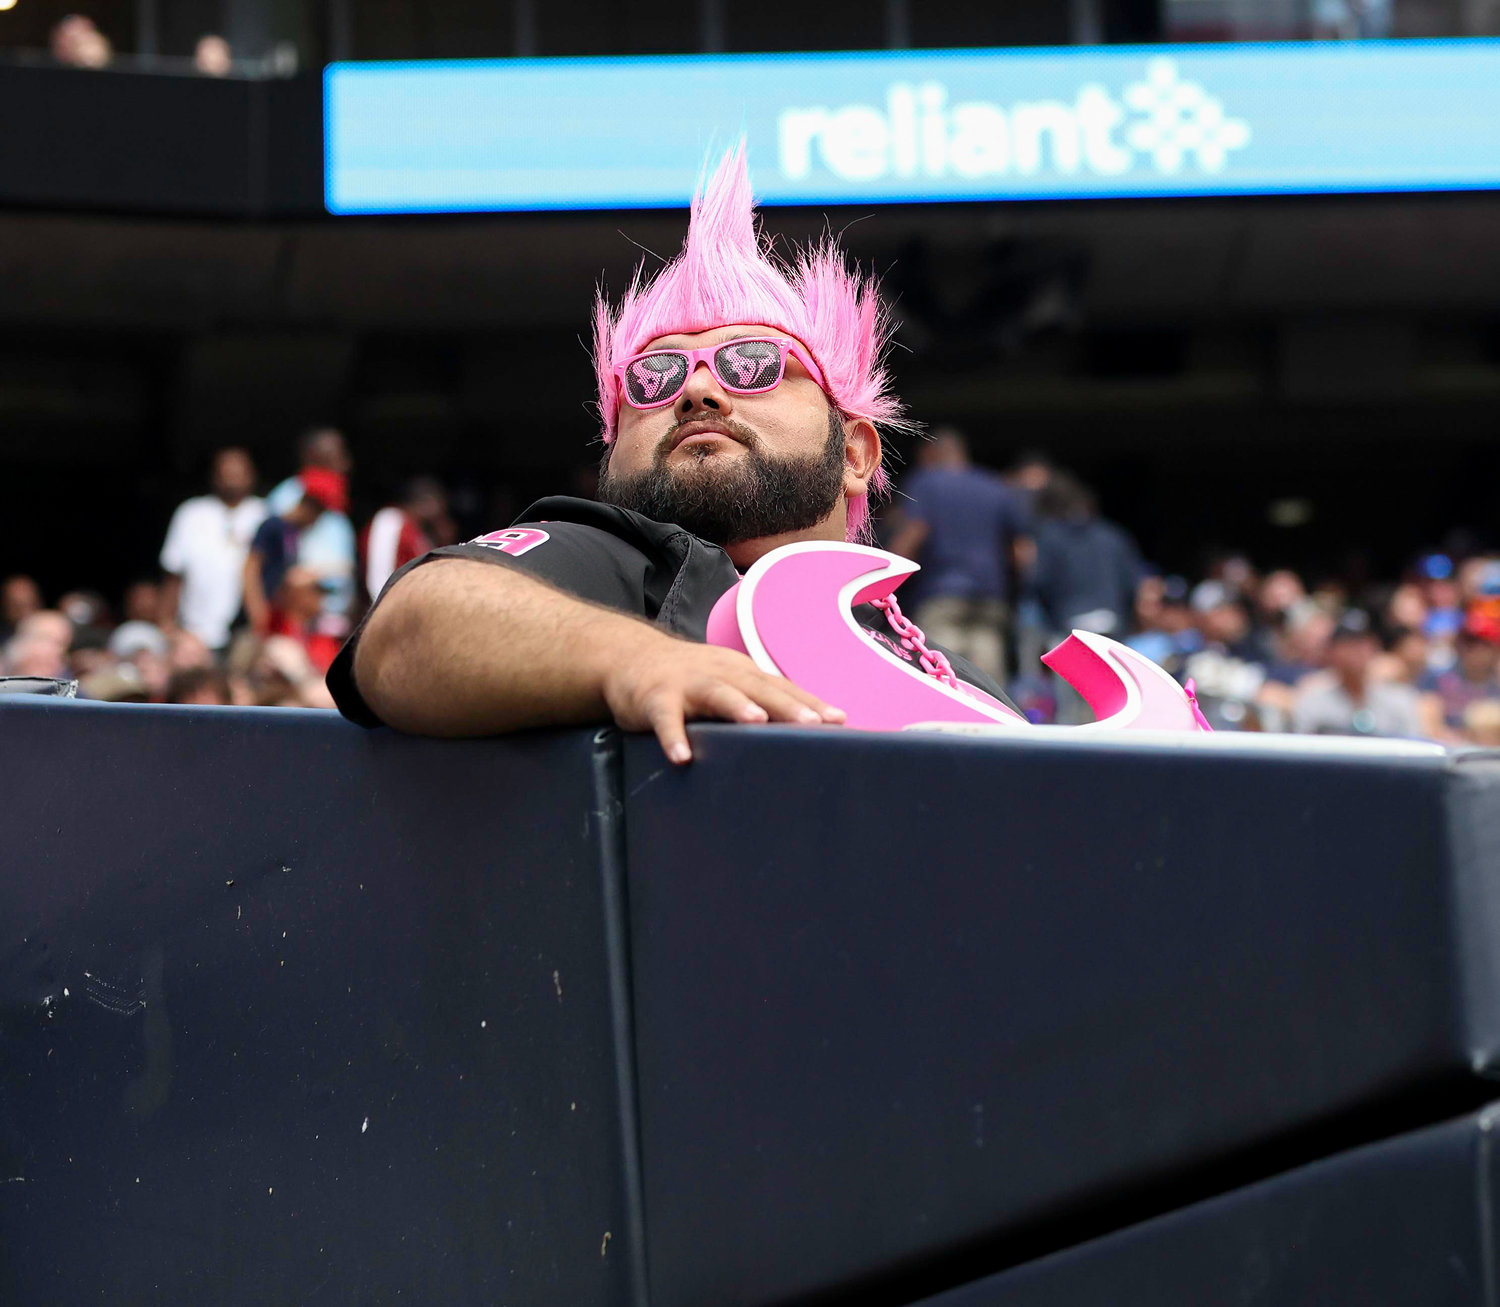 A Texans fan during an NFL game between the Texans and the Chargers on Oct. 2, 2022 in Houston. The Chargers won 34-24.